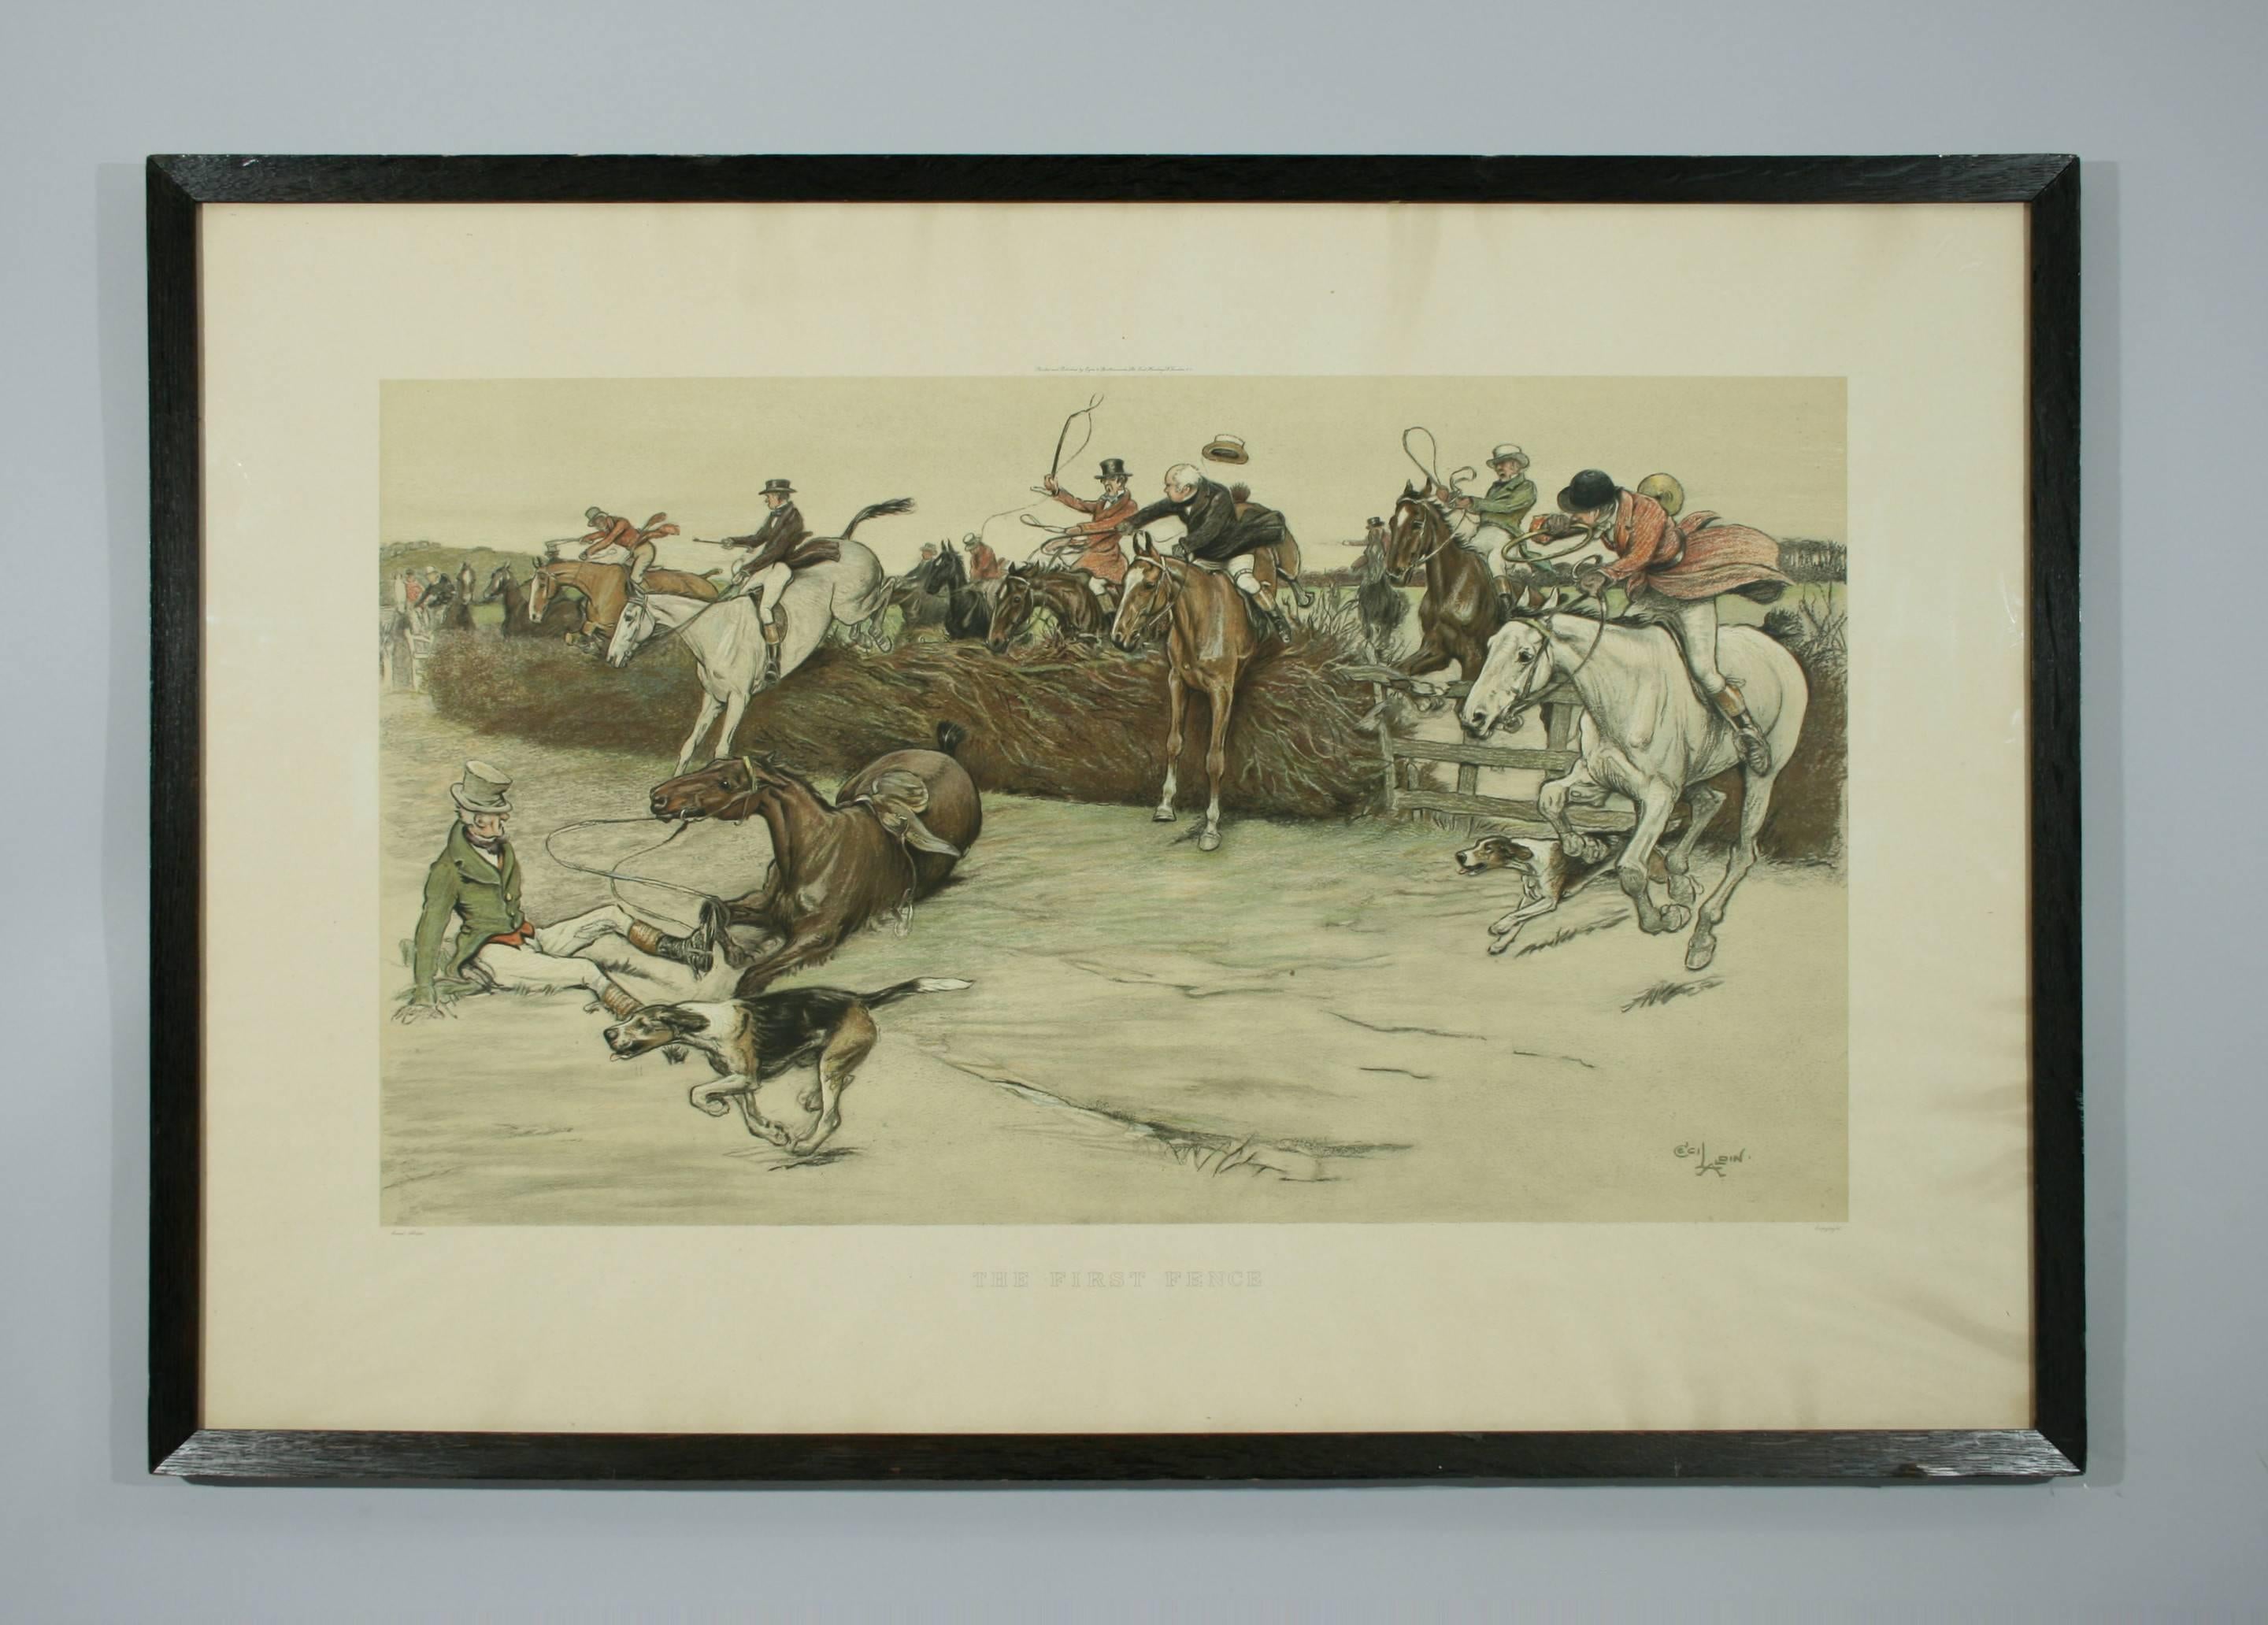 'The First fence' by Cecil Aldin. Equestrian Print,
A fine chromolithograph after Cecil Aldin en-titled 